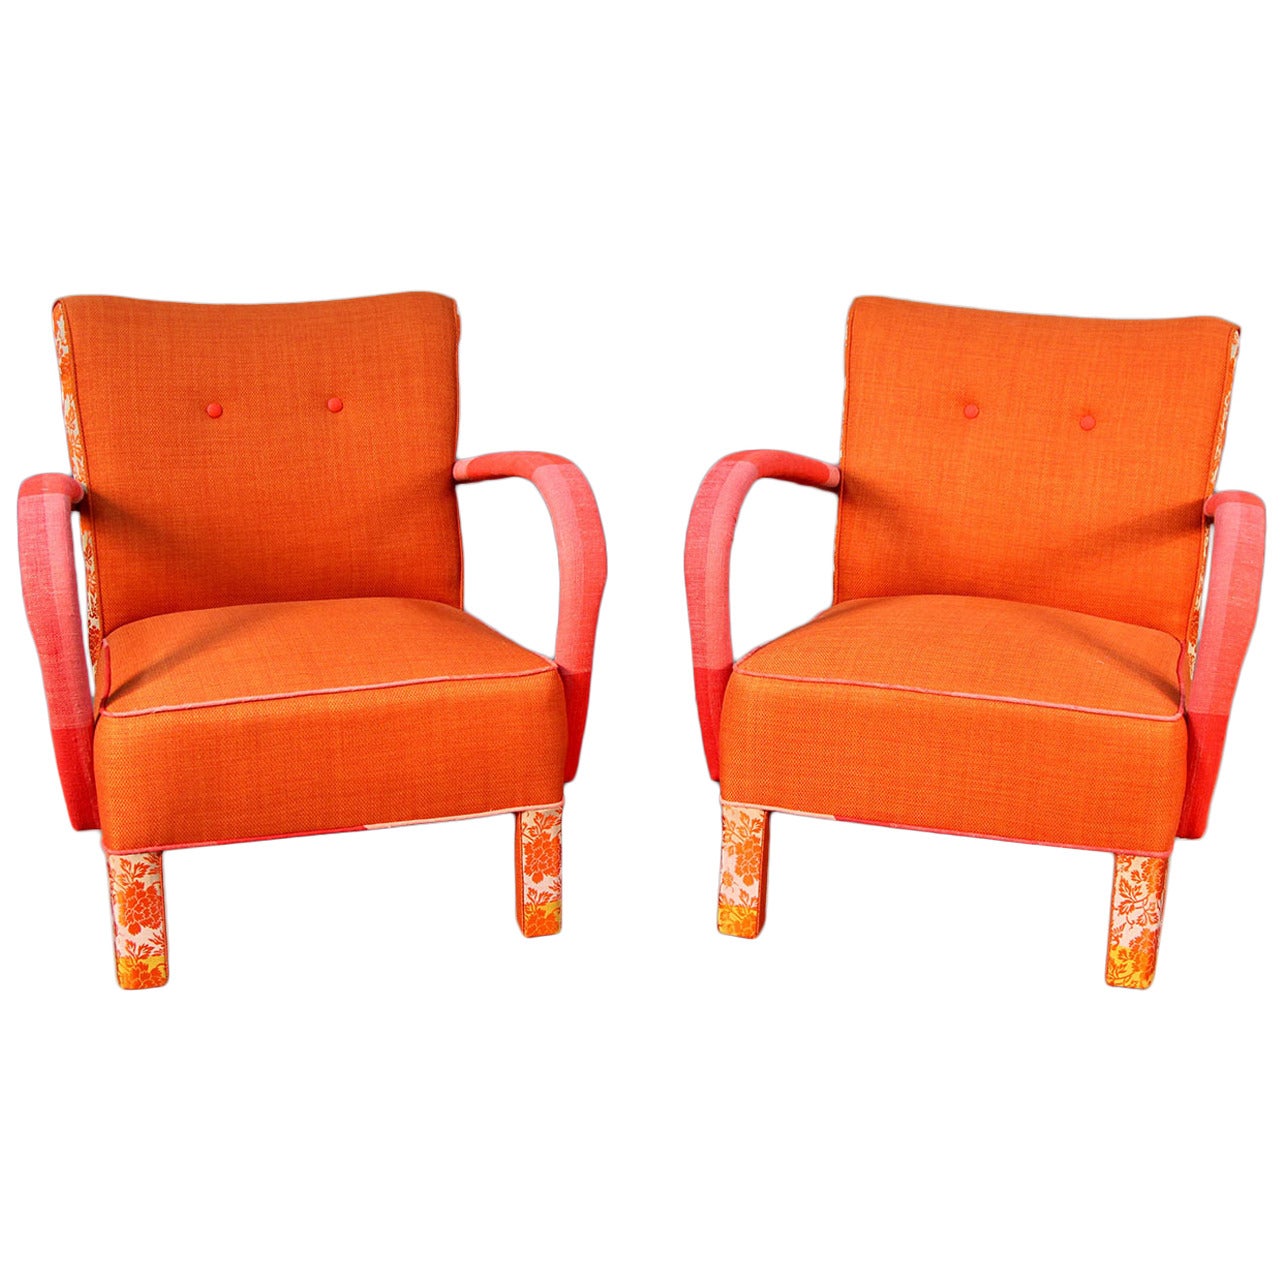 Pair of Jindrich Halabala "Orange Fusion Chairs" For Sale